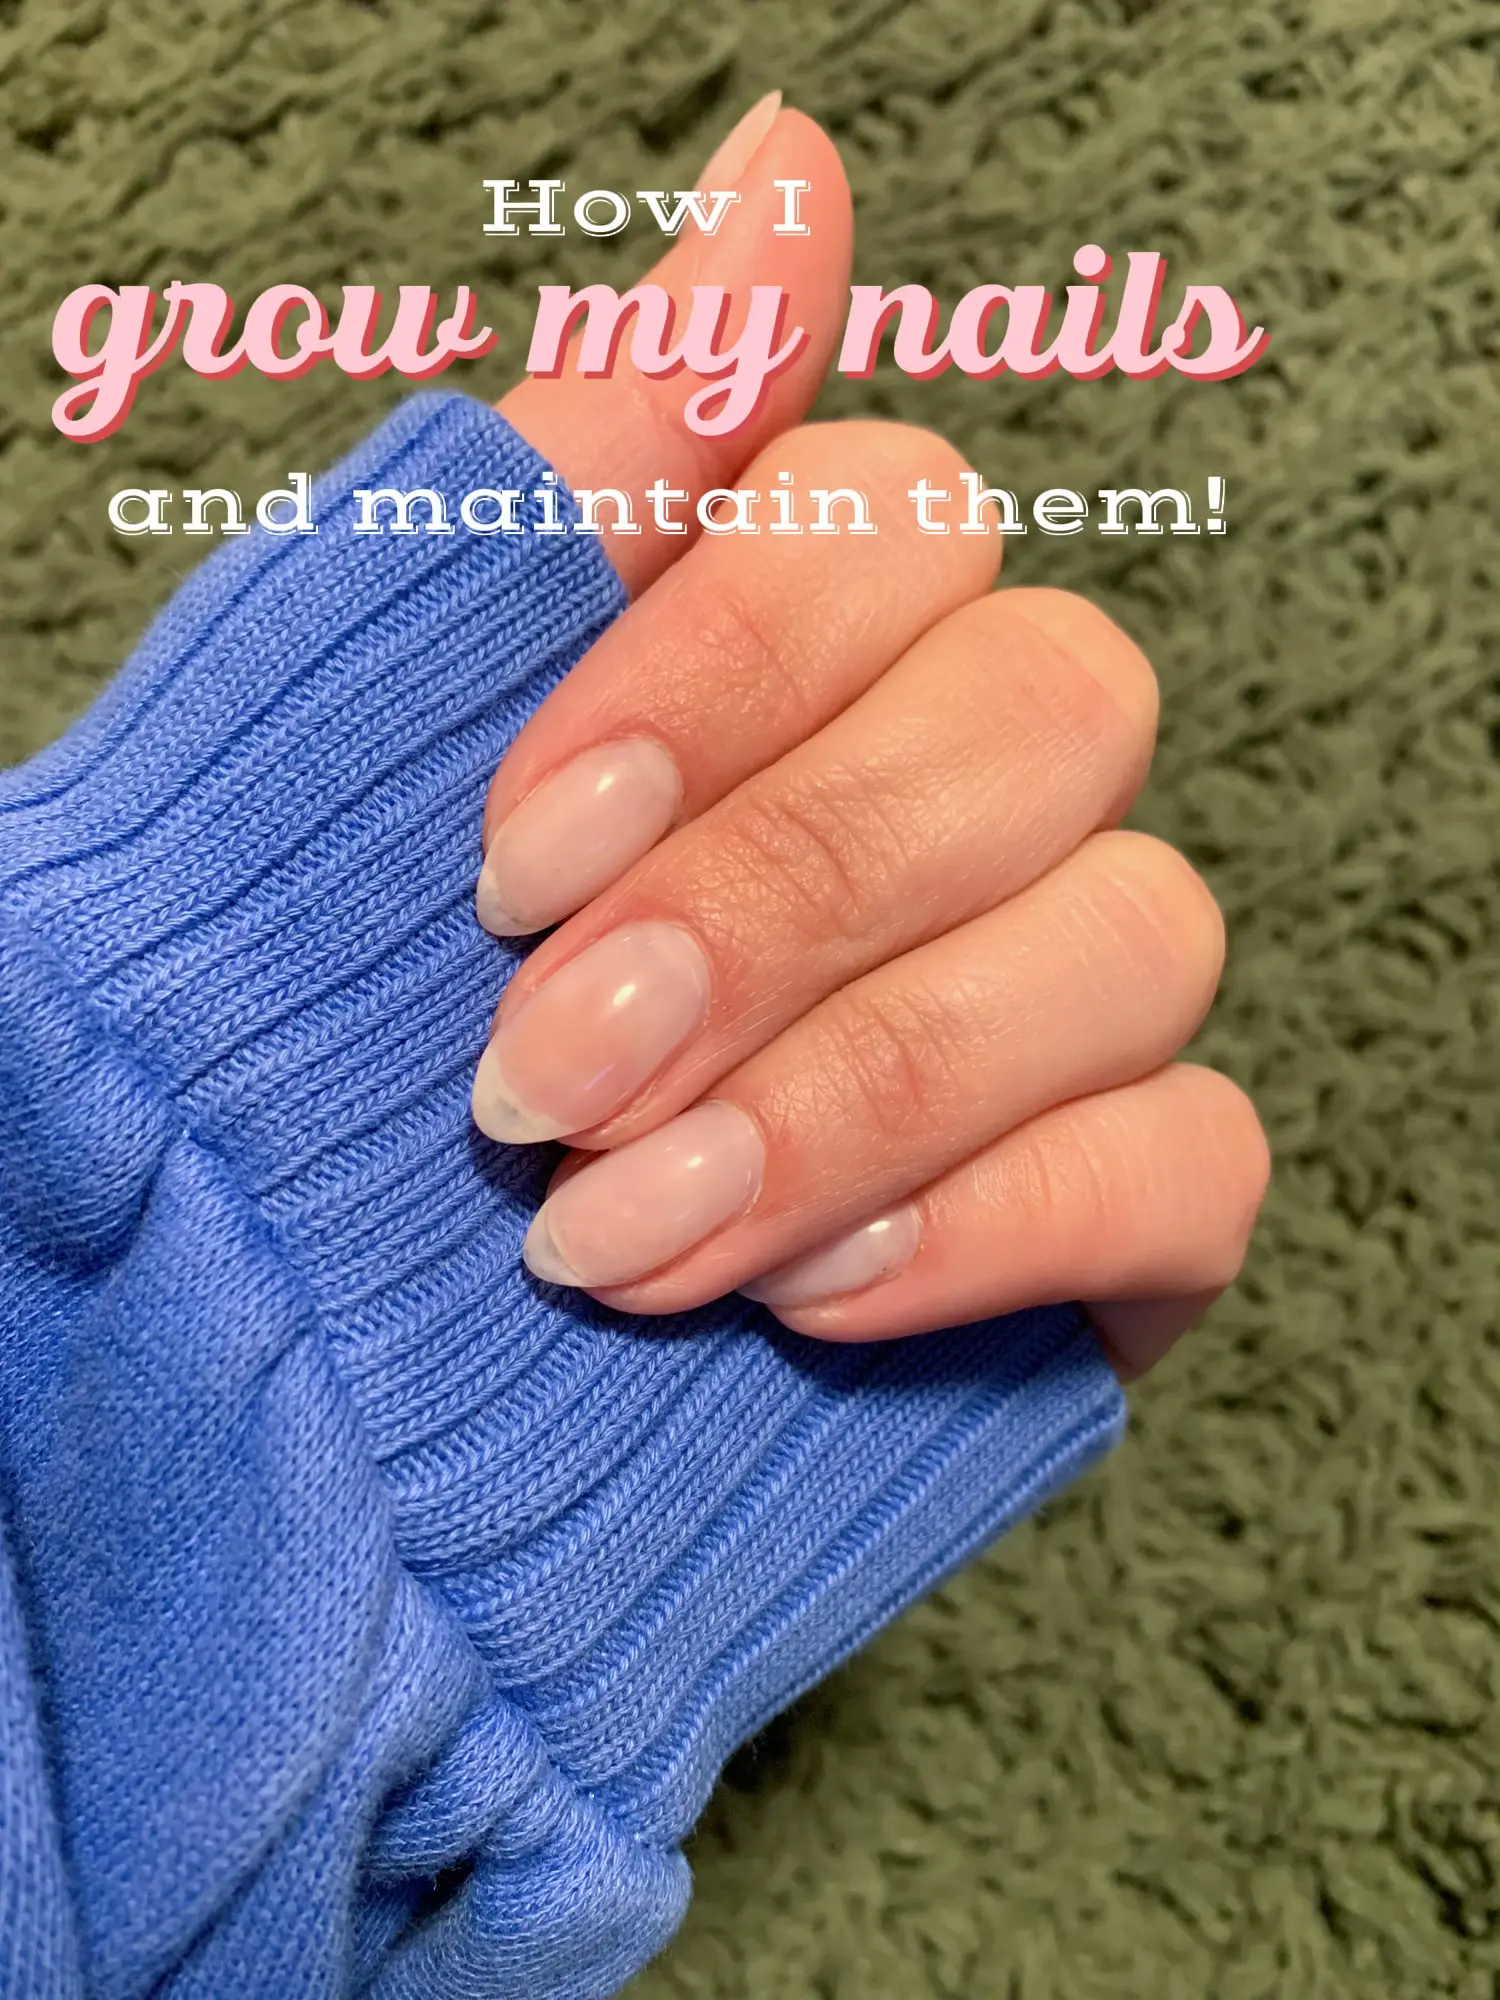 Exploring Nail Growth 101: How to Make Your Nails Grow Faster and Stronger